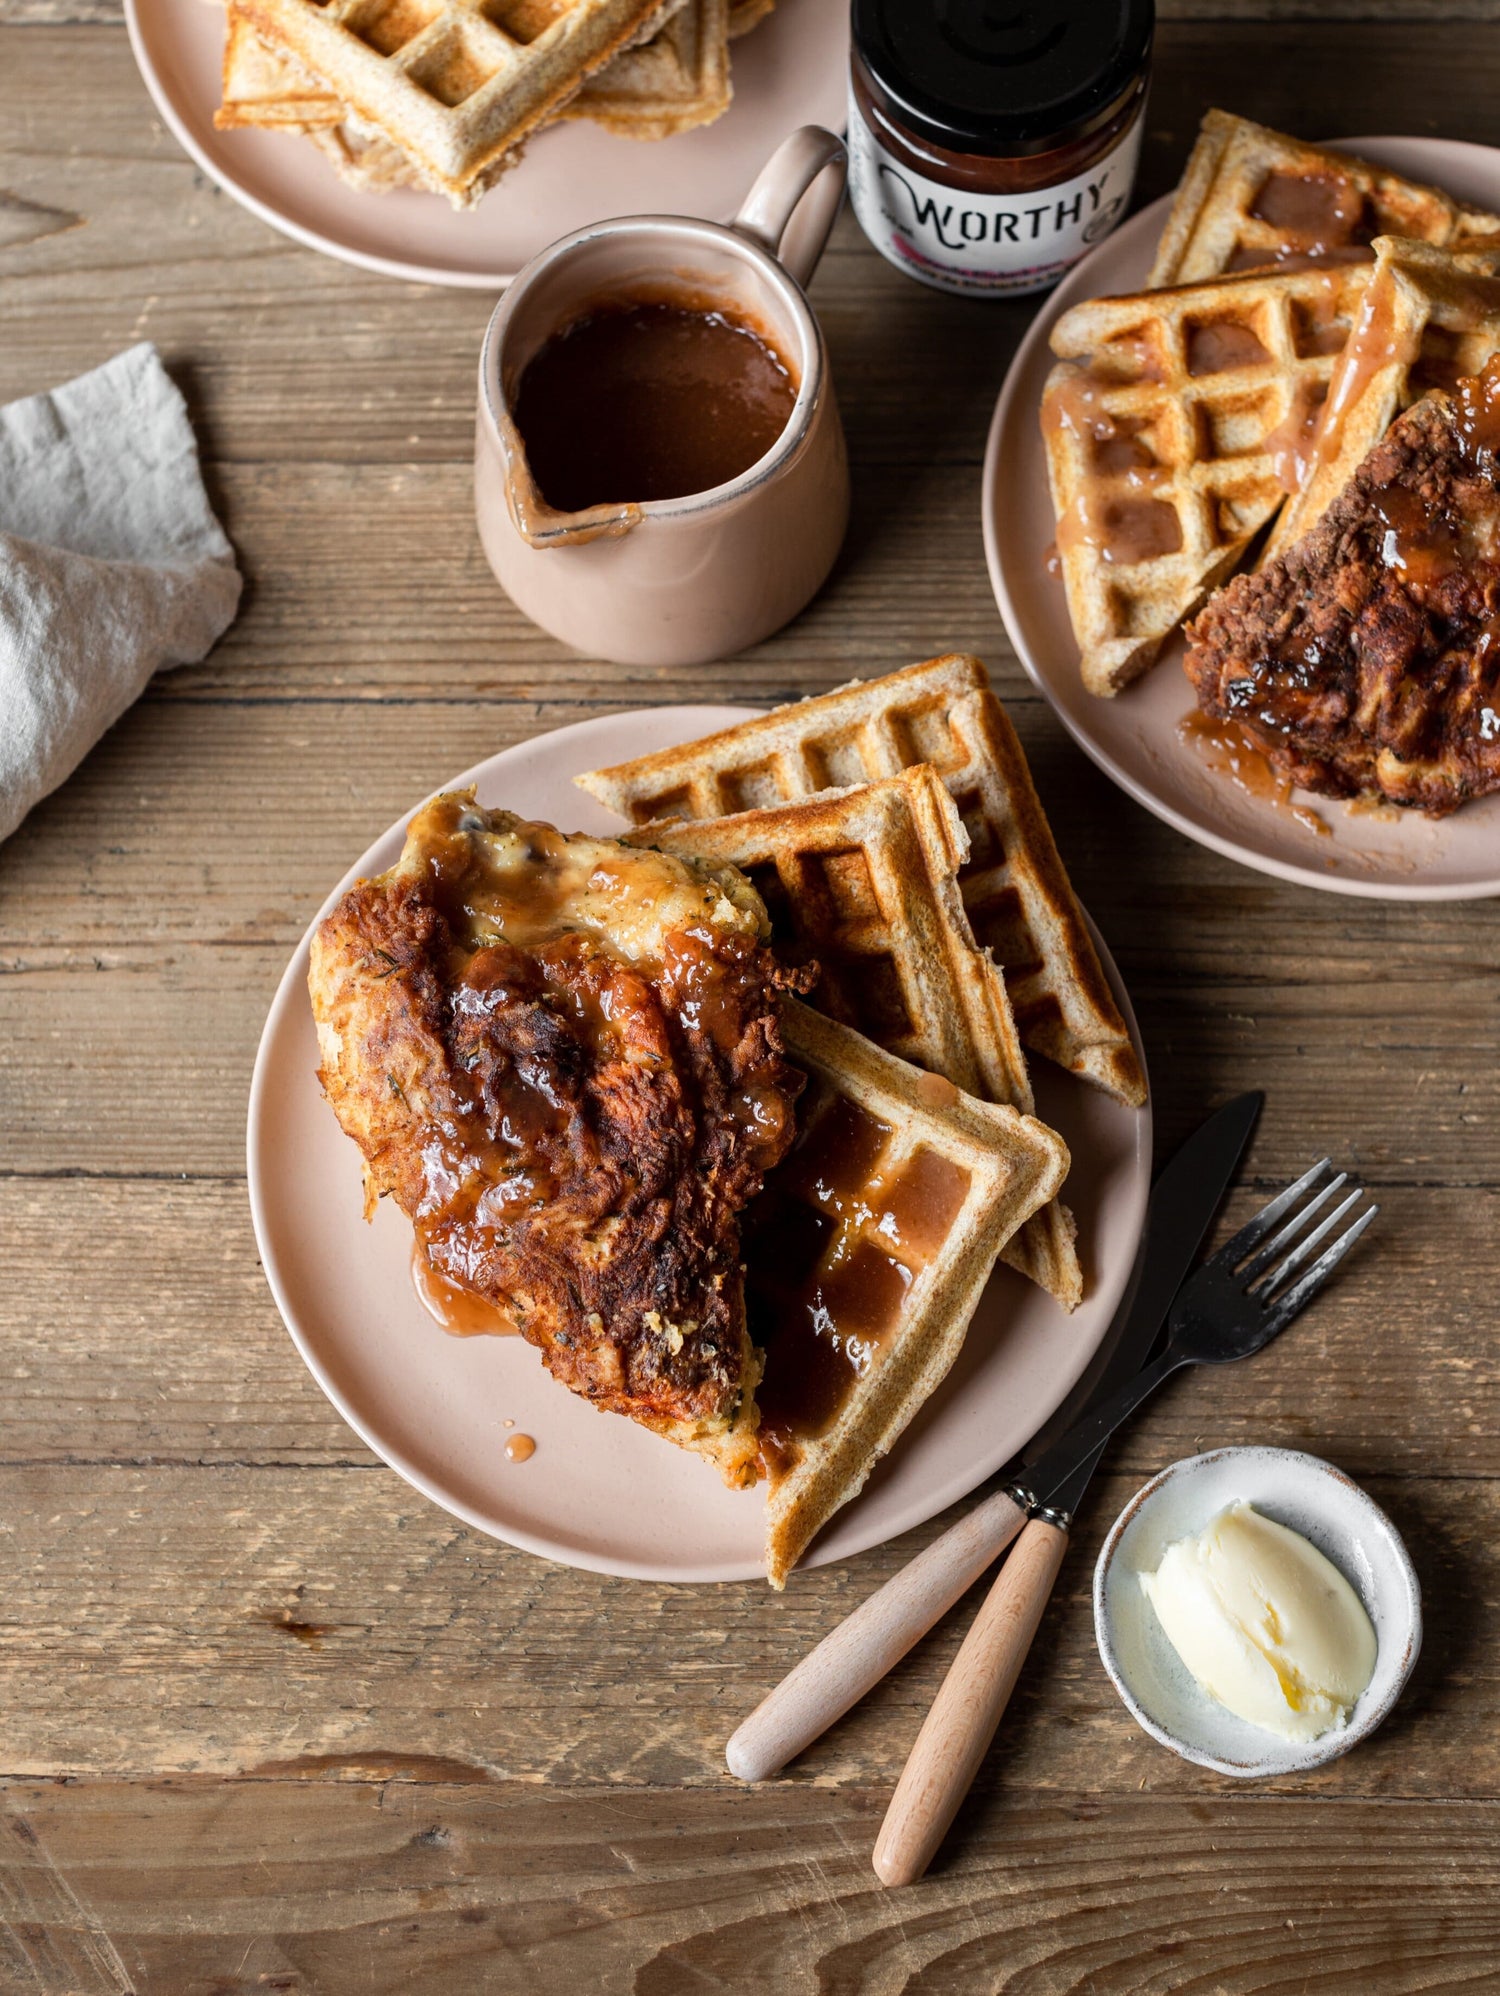 Chicken & waffles drizzled with vanilla rhubarb butter made with Worthy’s Vanilla Rhubarb jam in a rustic setting.